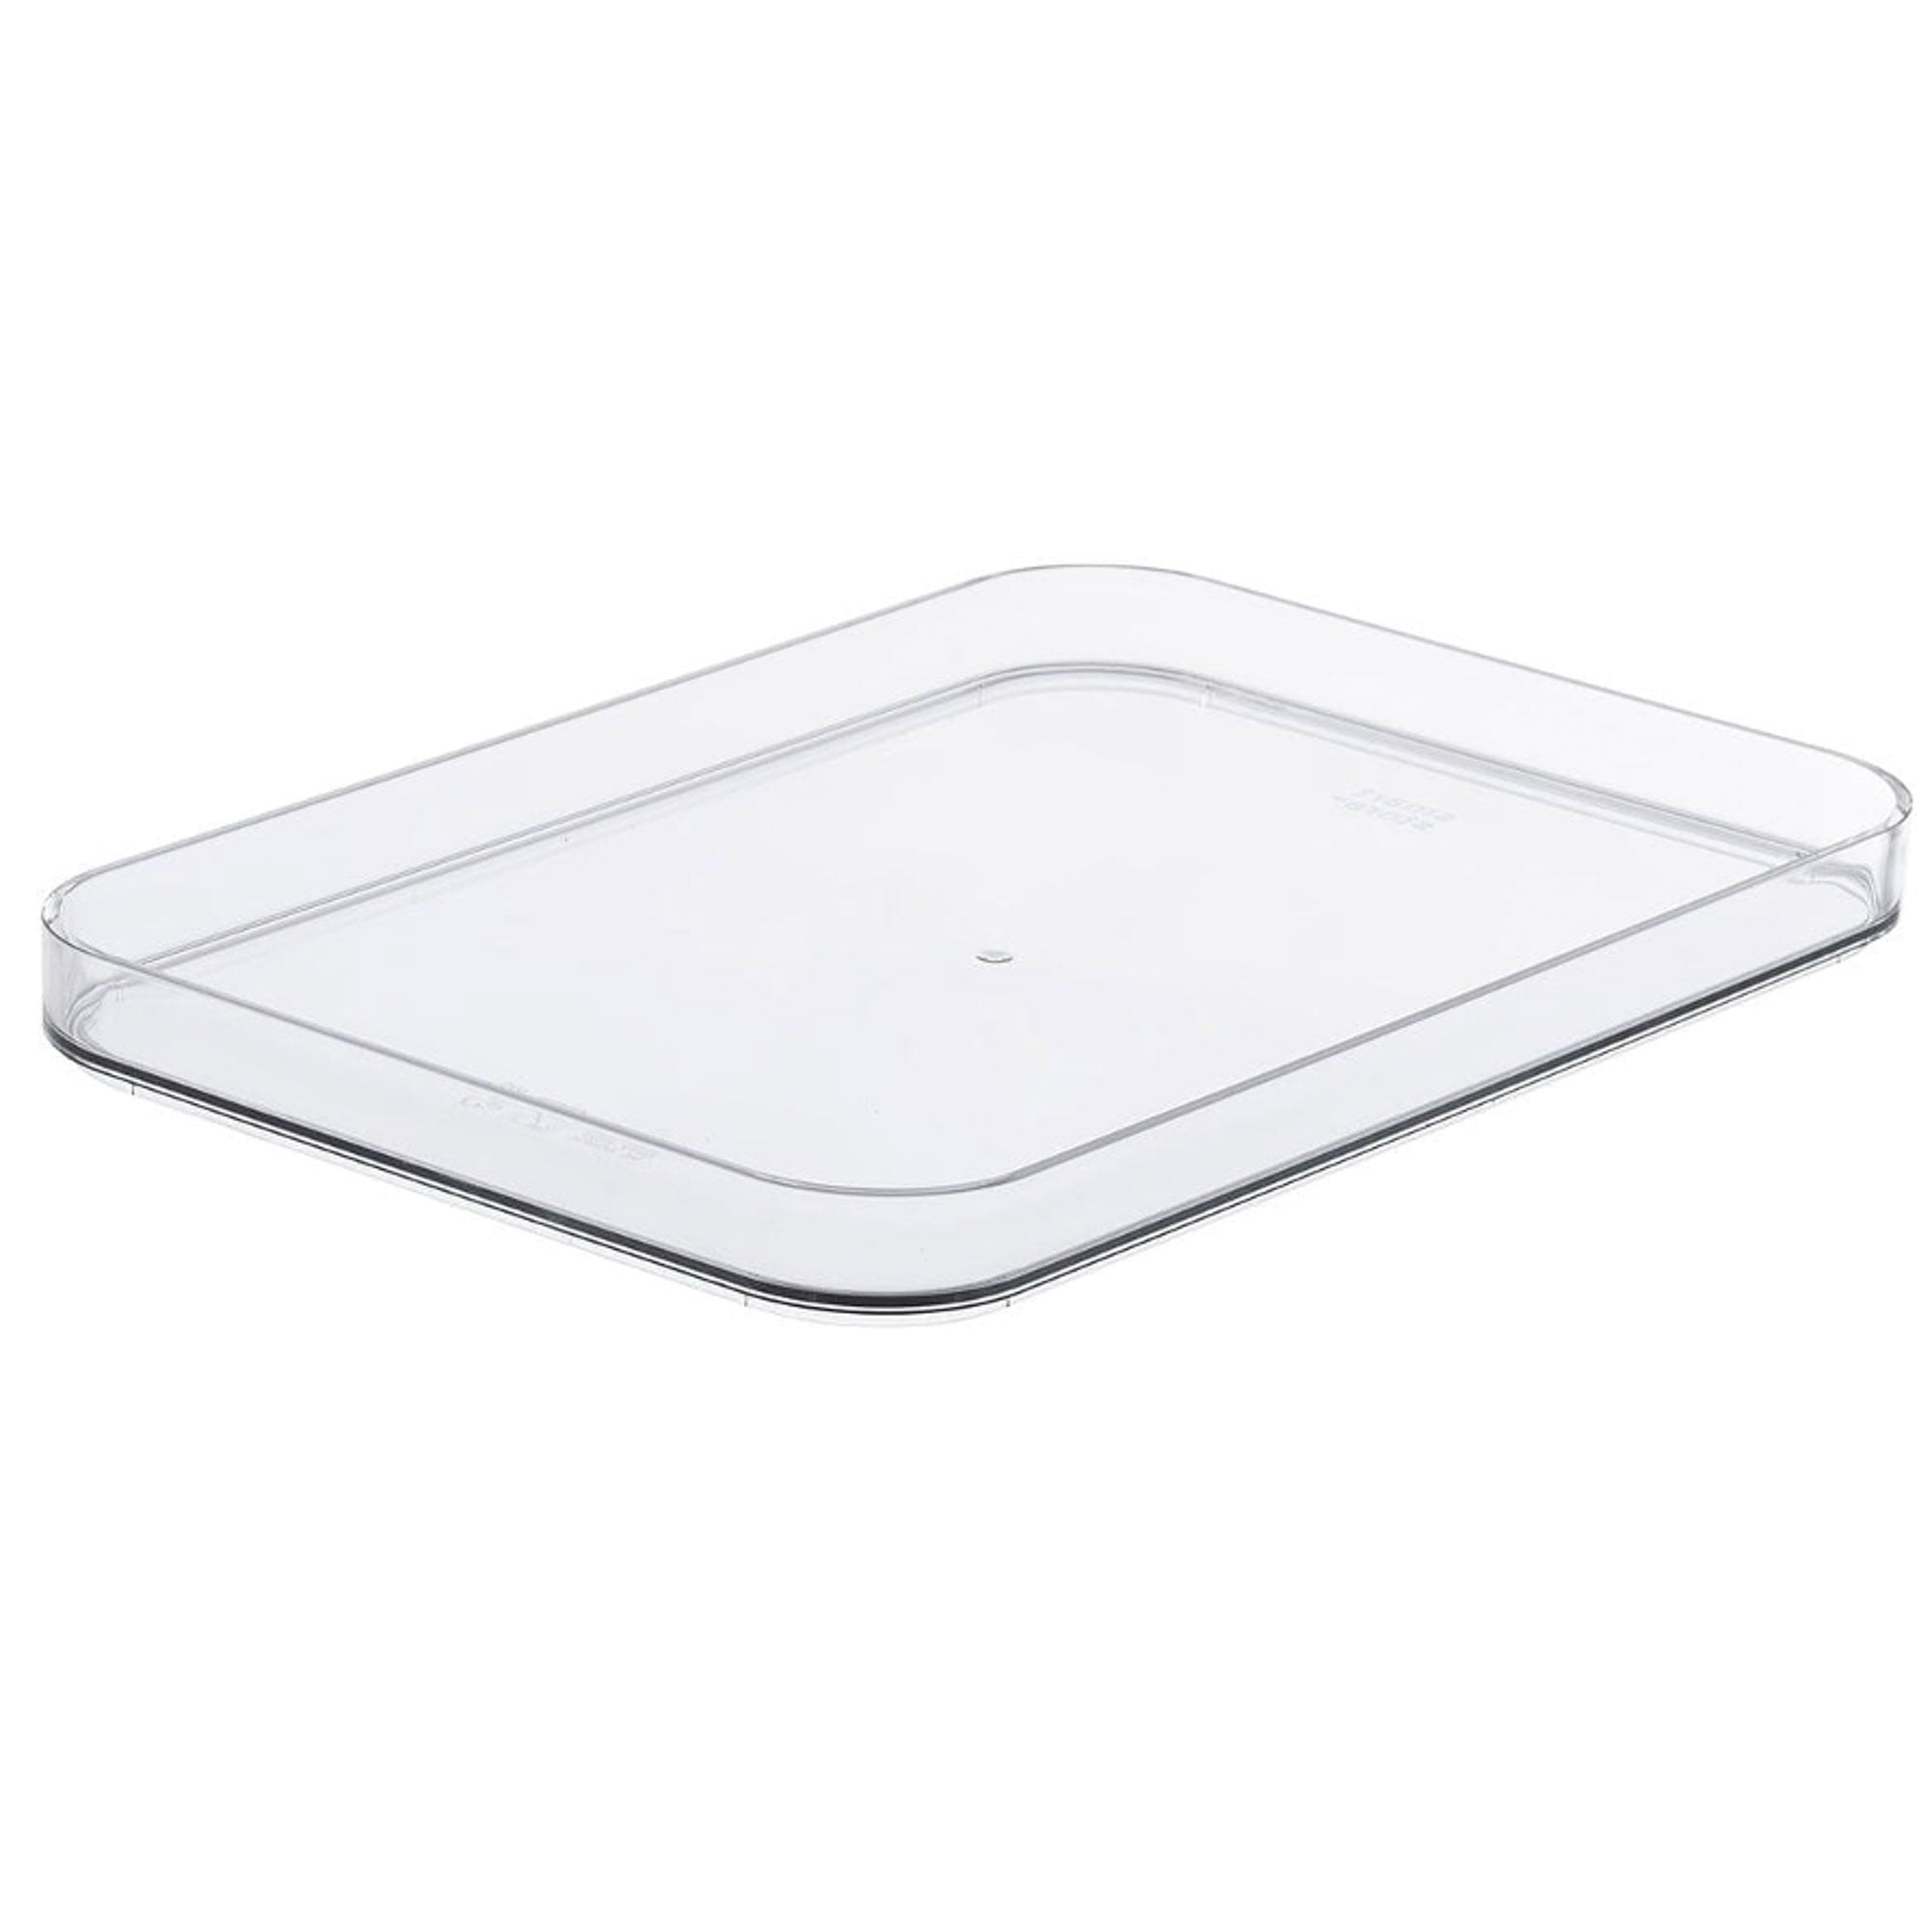 SmartStore lid for box size large